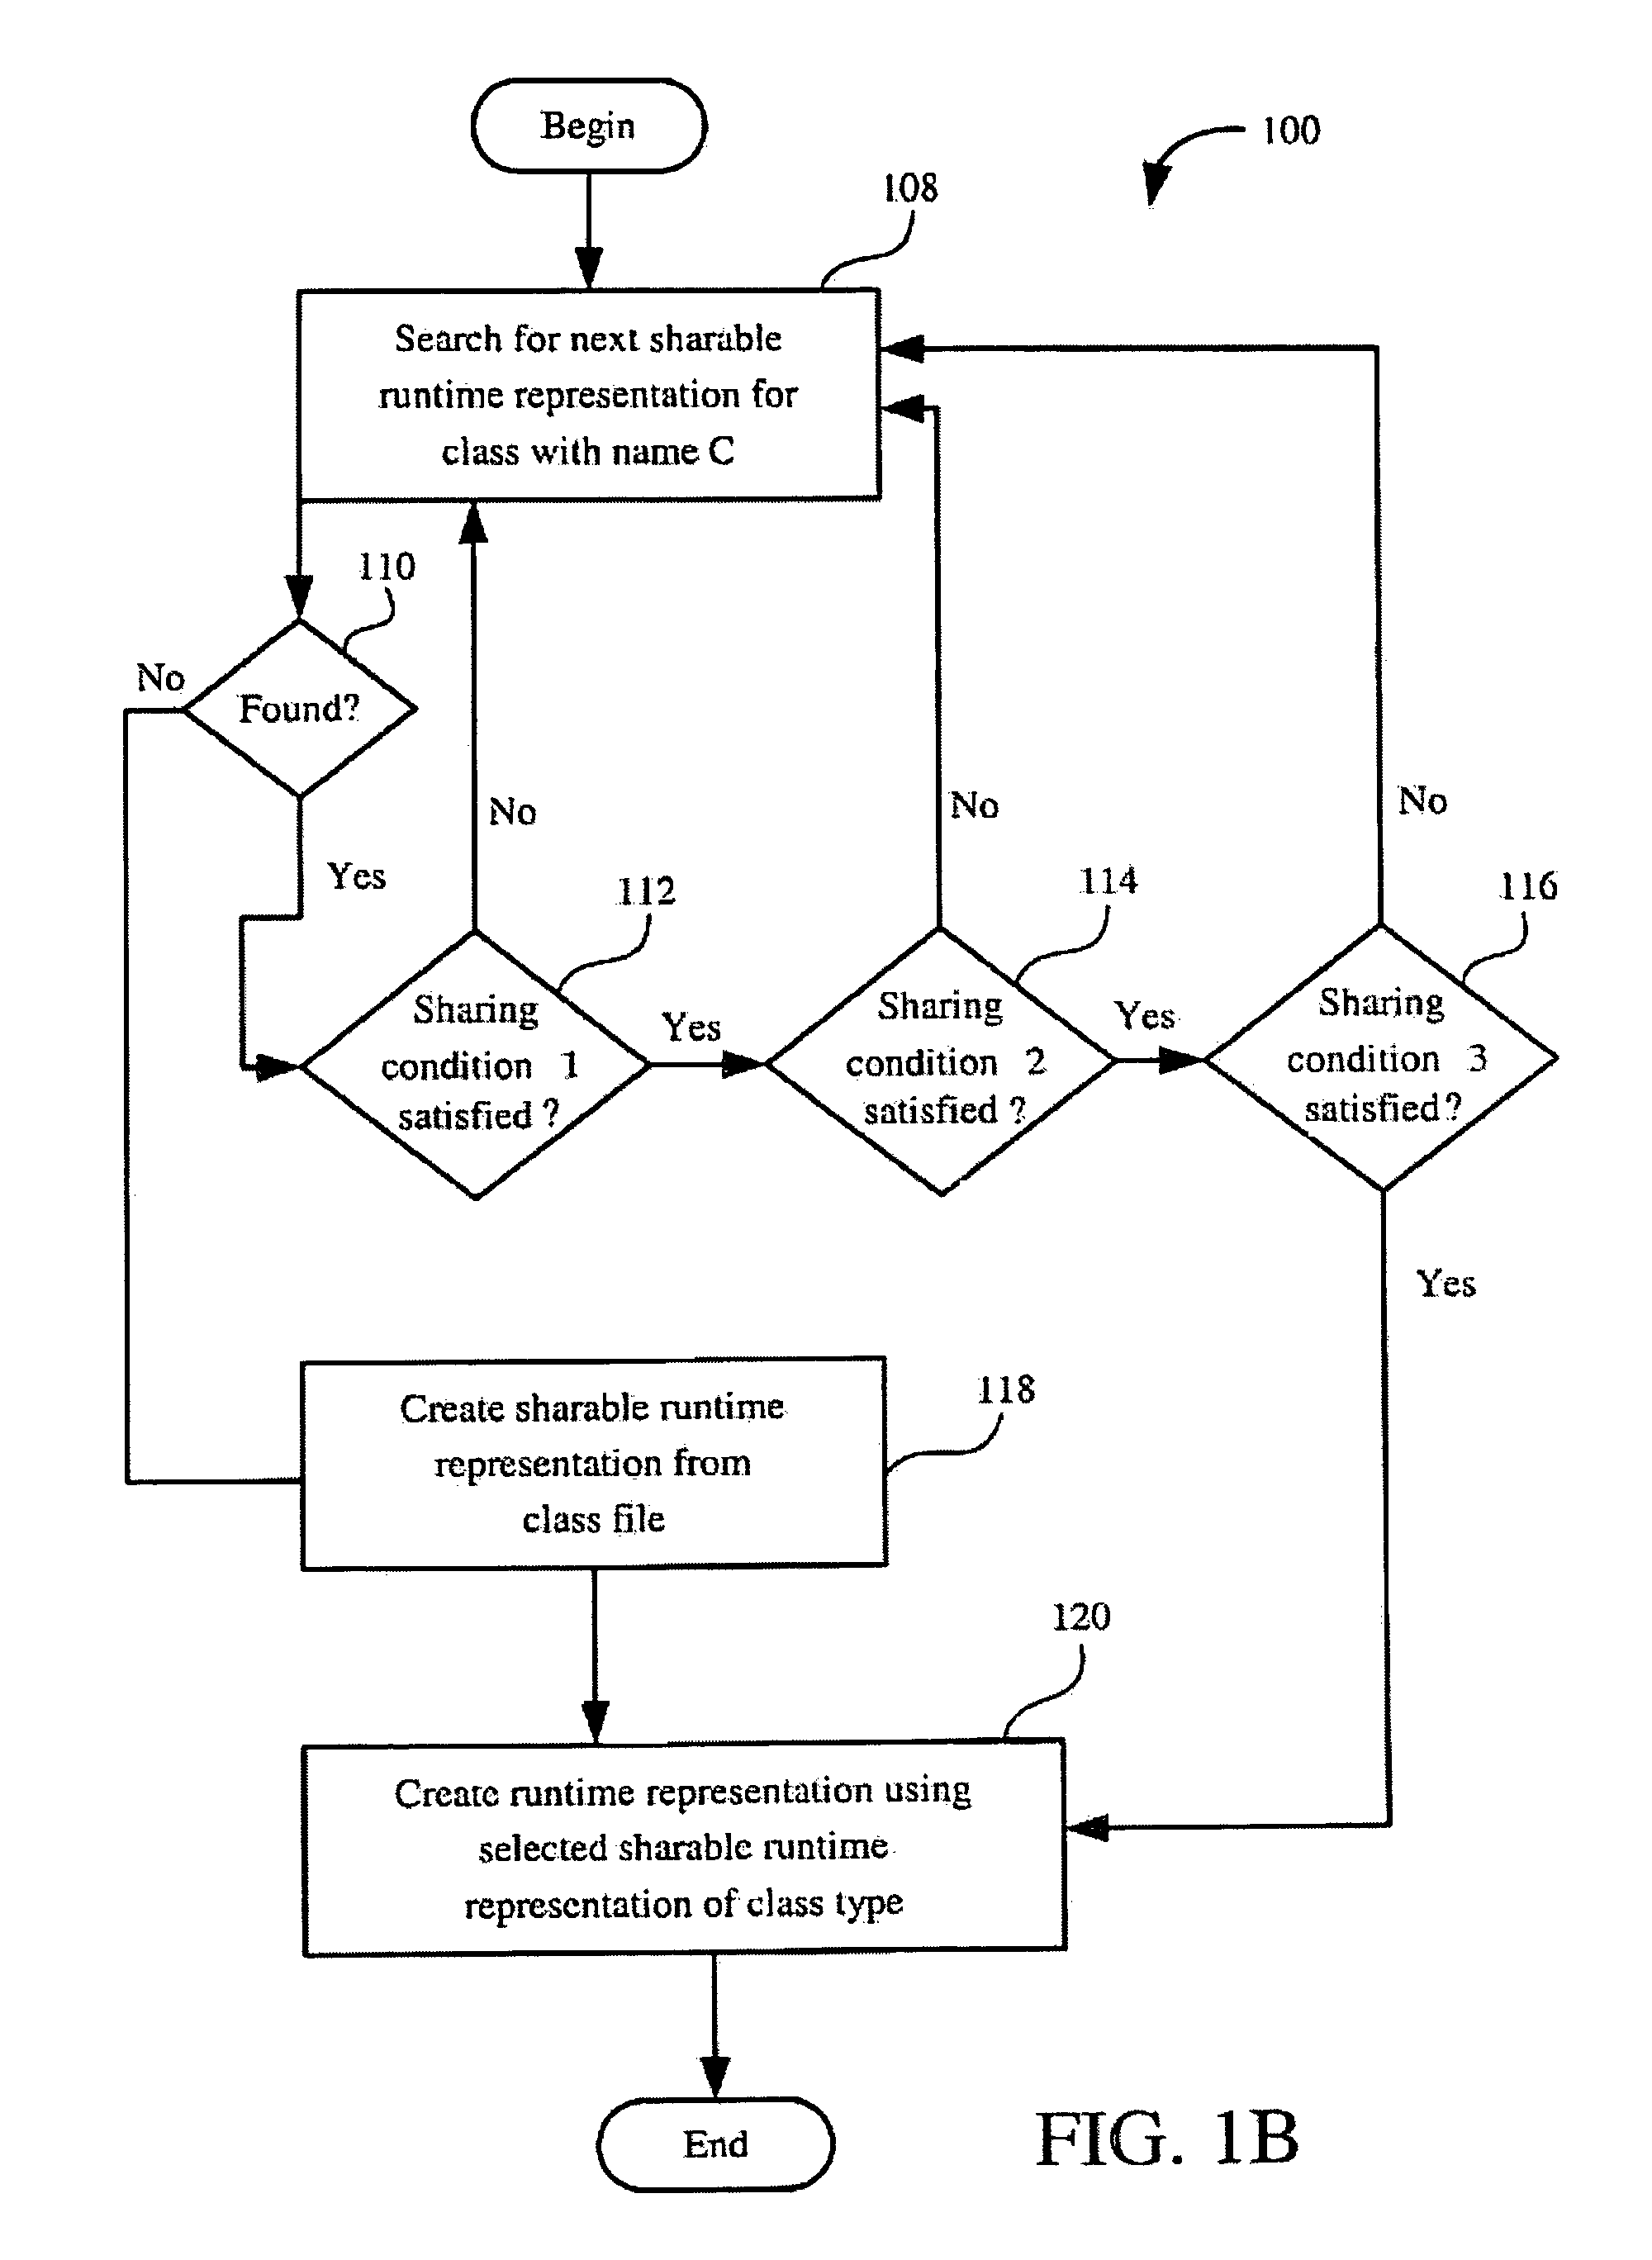 Methods for implementing virtual method invocation with shared code